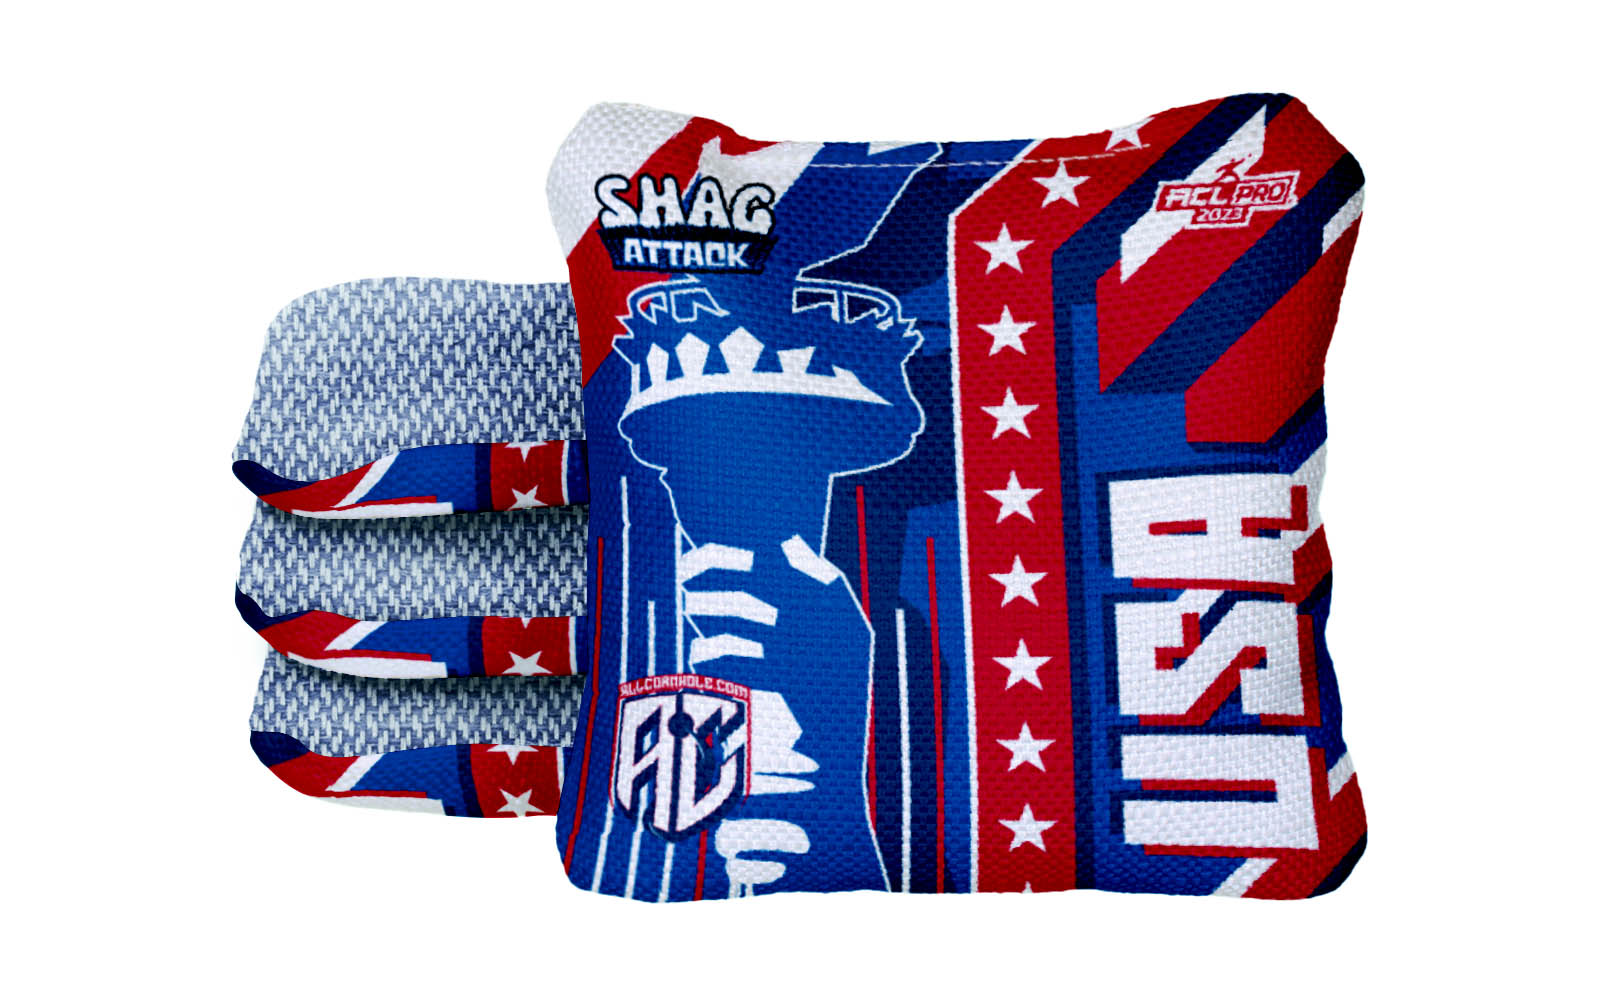 Shag Attack Carpet Cornhole Bags - 4th of July Torch Edition - SET OF 4